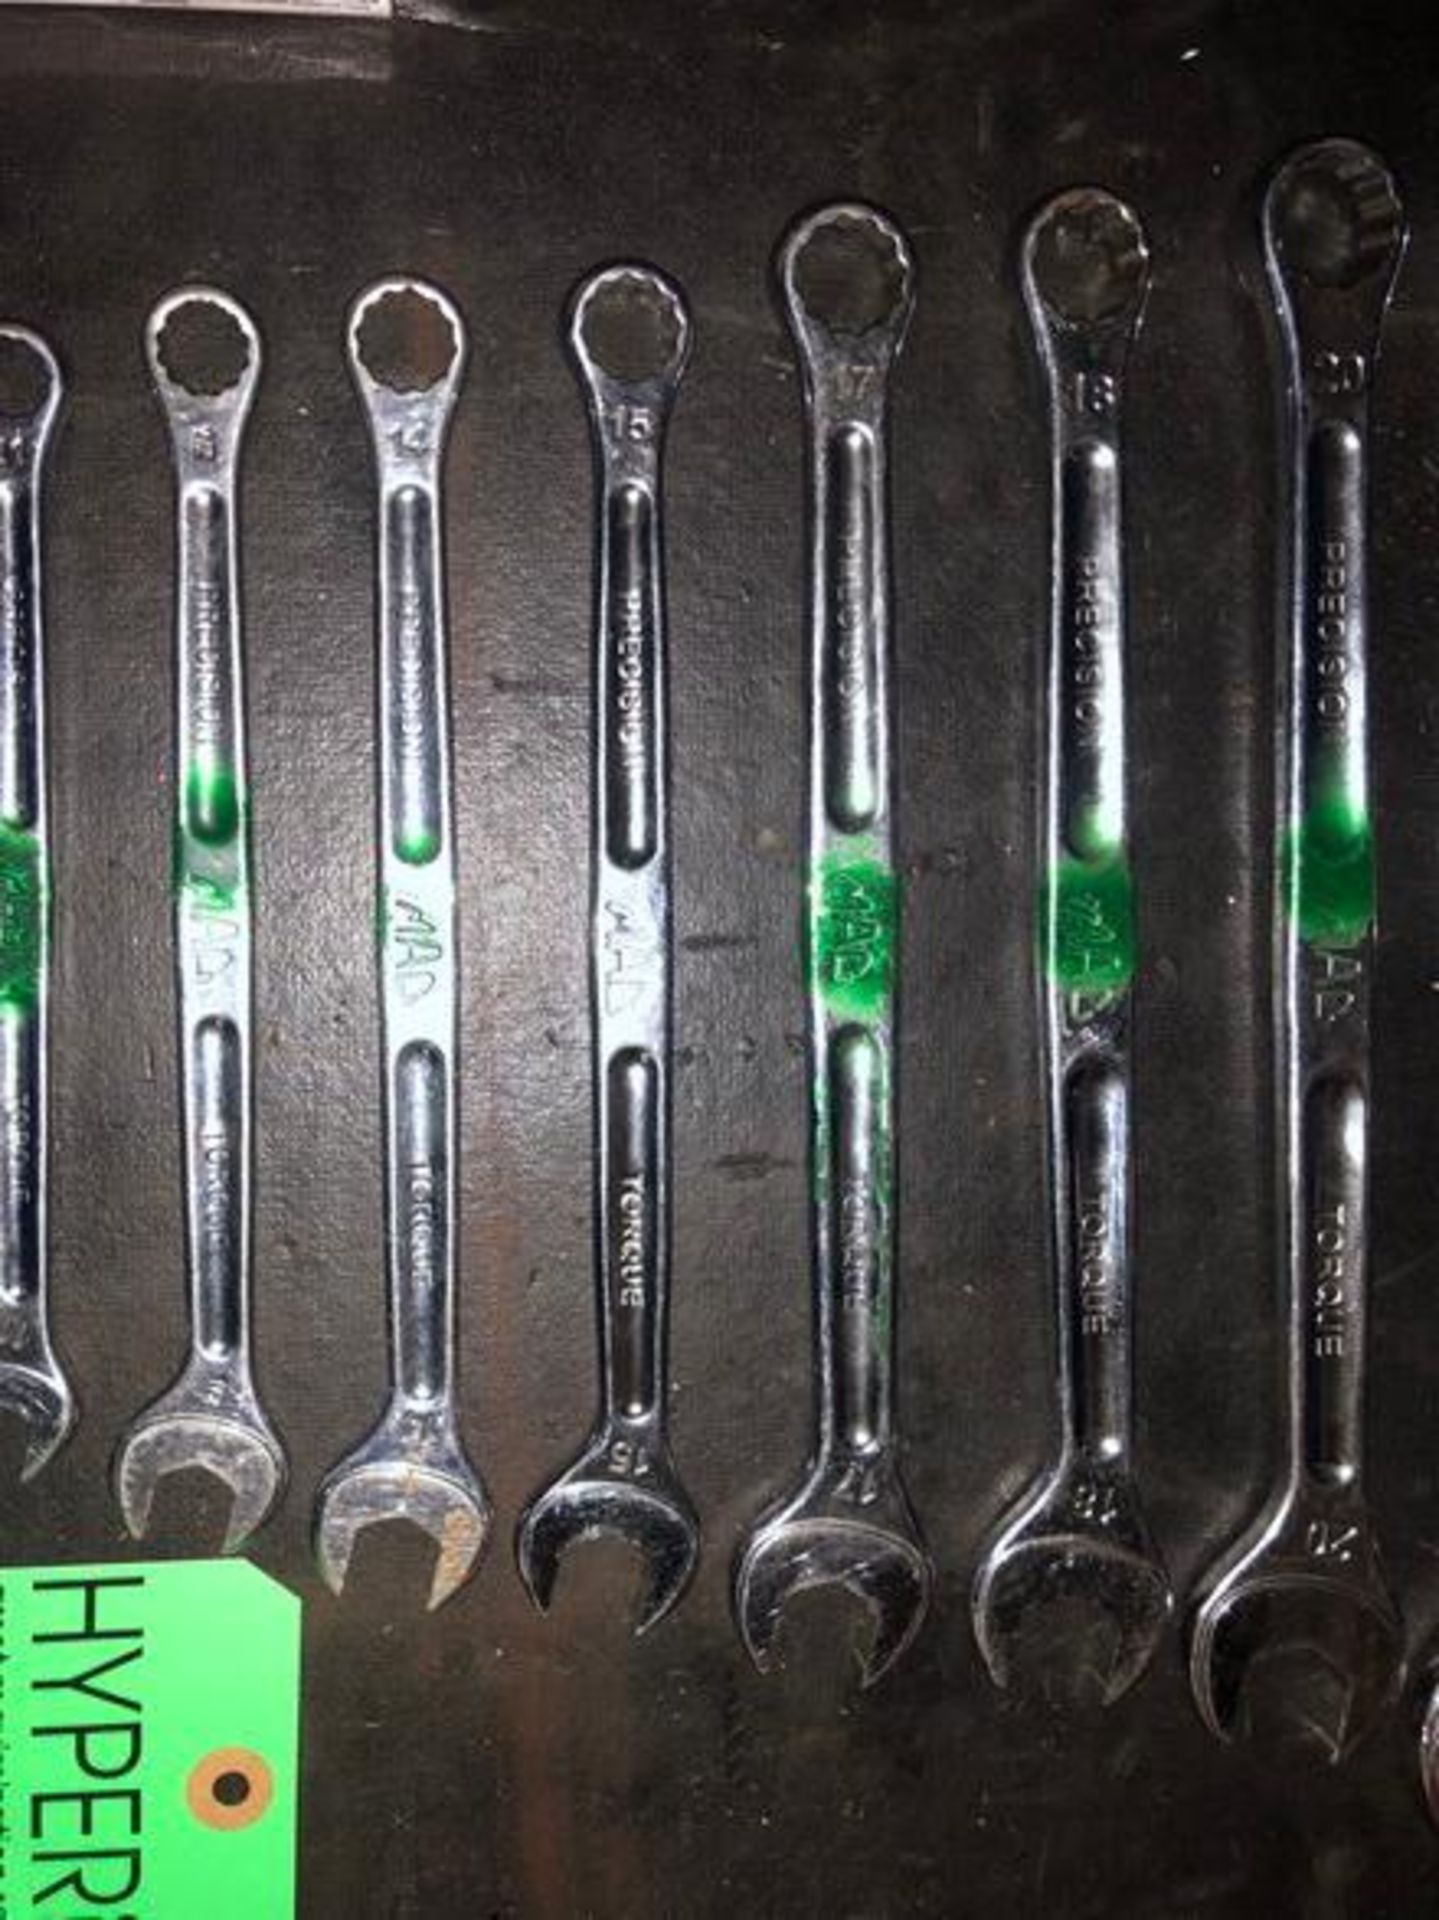 Mac 14 Piece Combination Wrench Sets - Image 3 of 5